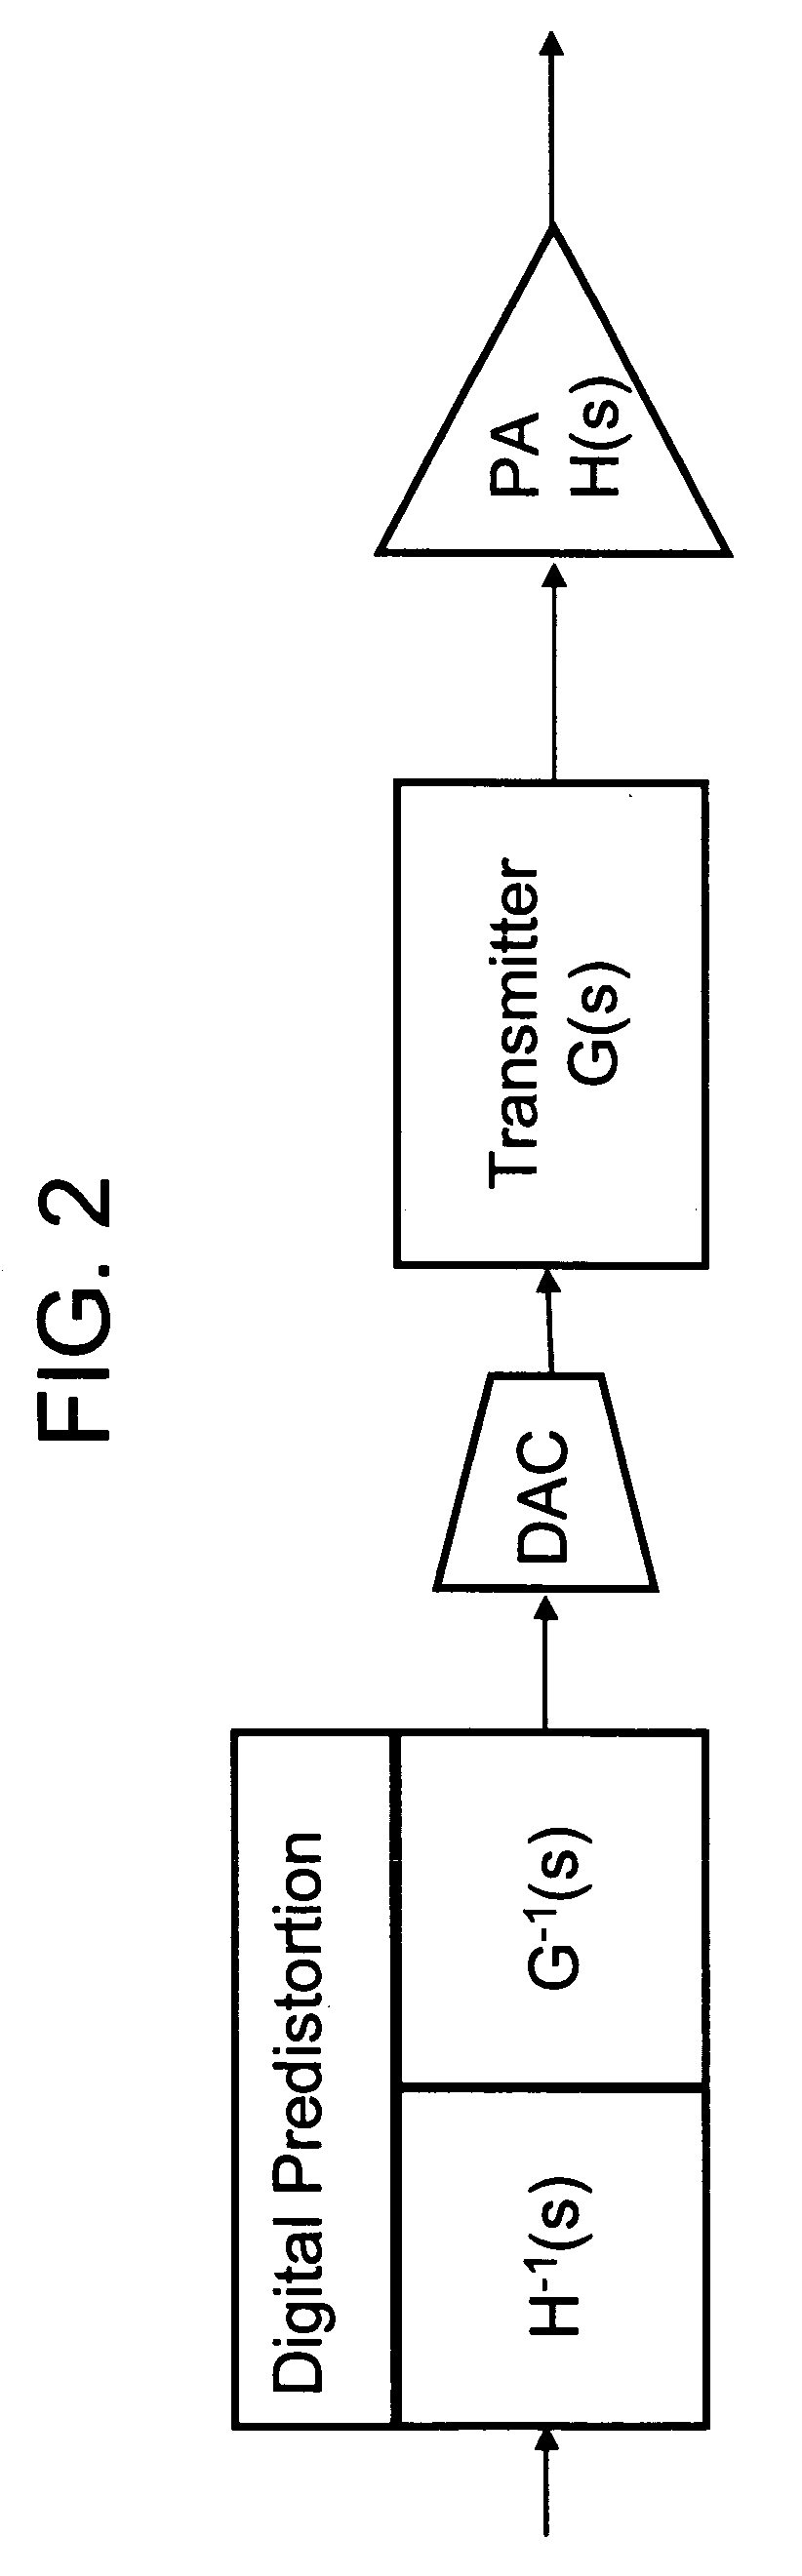 Method of power amplifier predistortion adaptation using compression detection